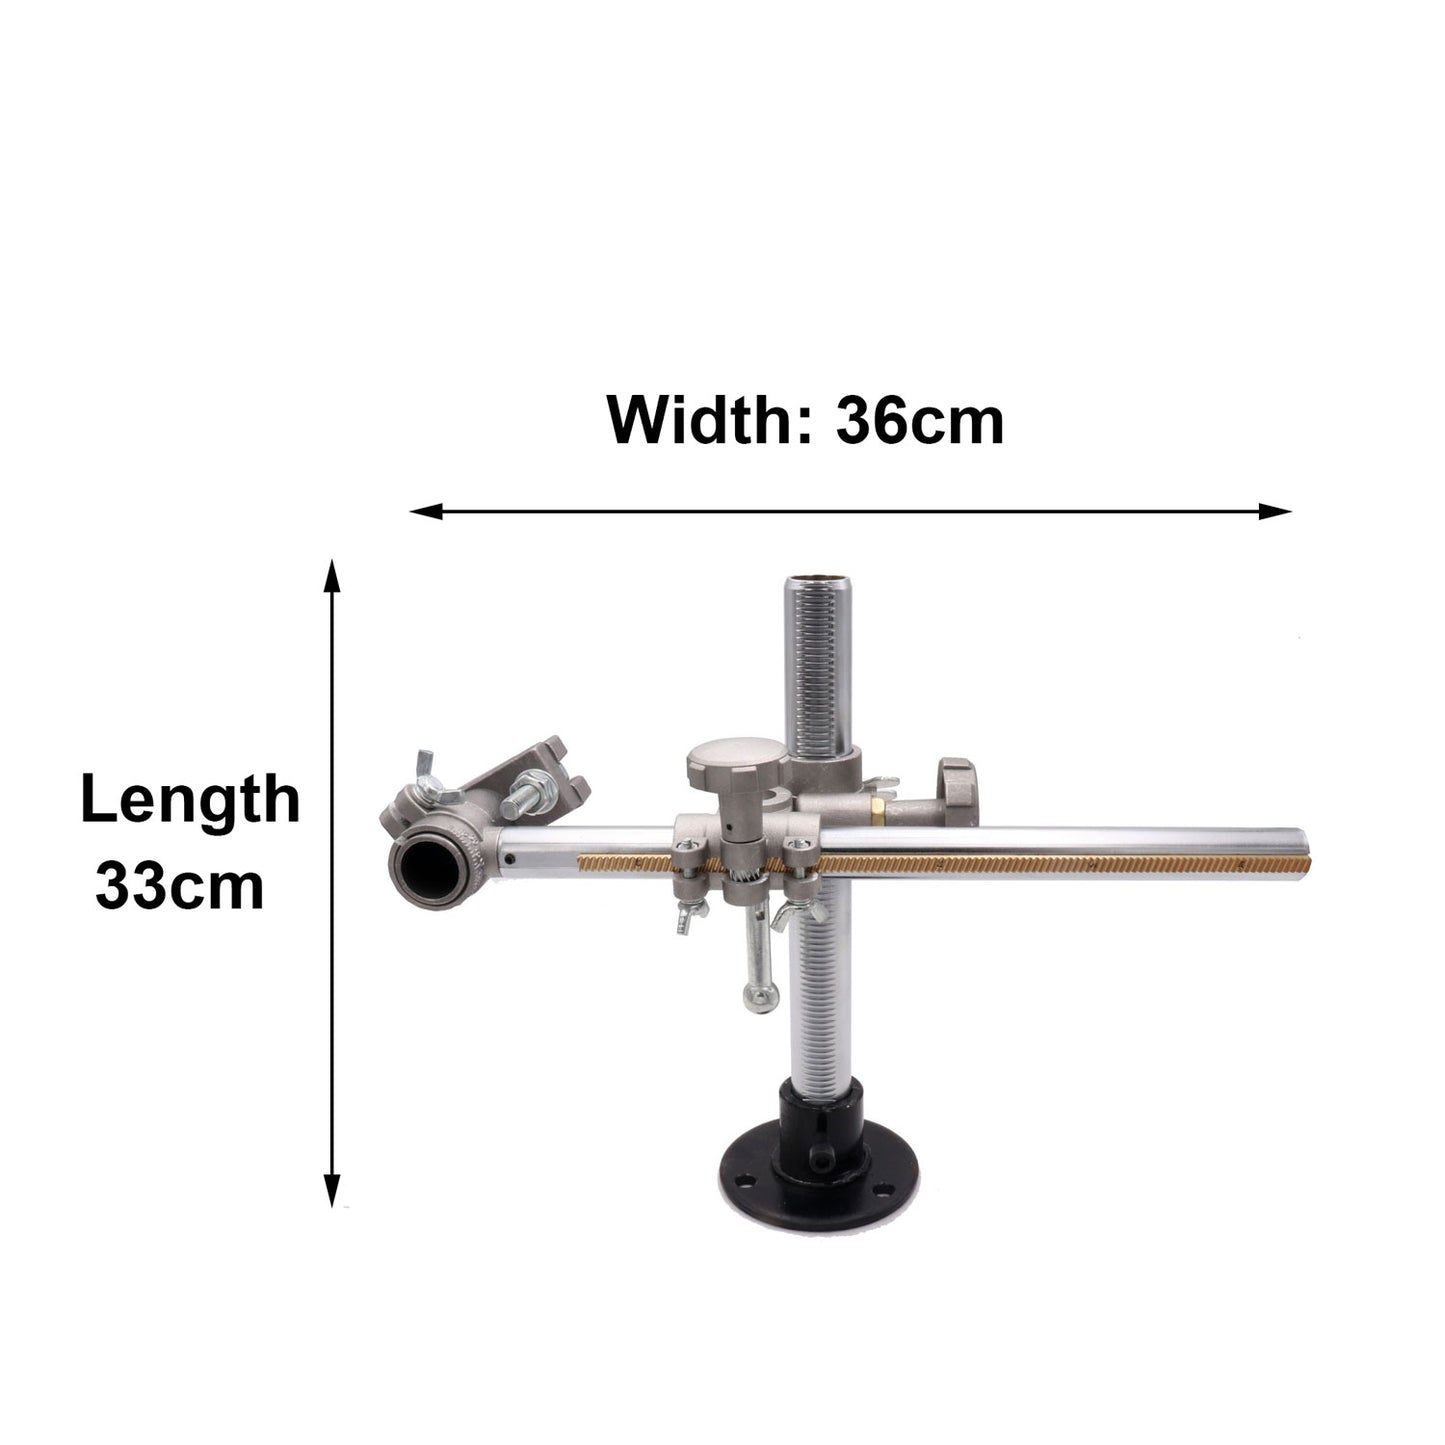 JINSLU Welding Turntable Positioner Torch Holder 50x100cm with Support Clamp Mountings.